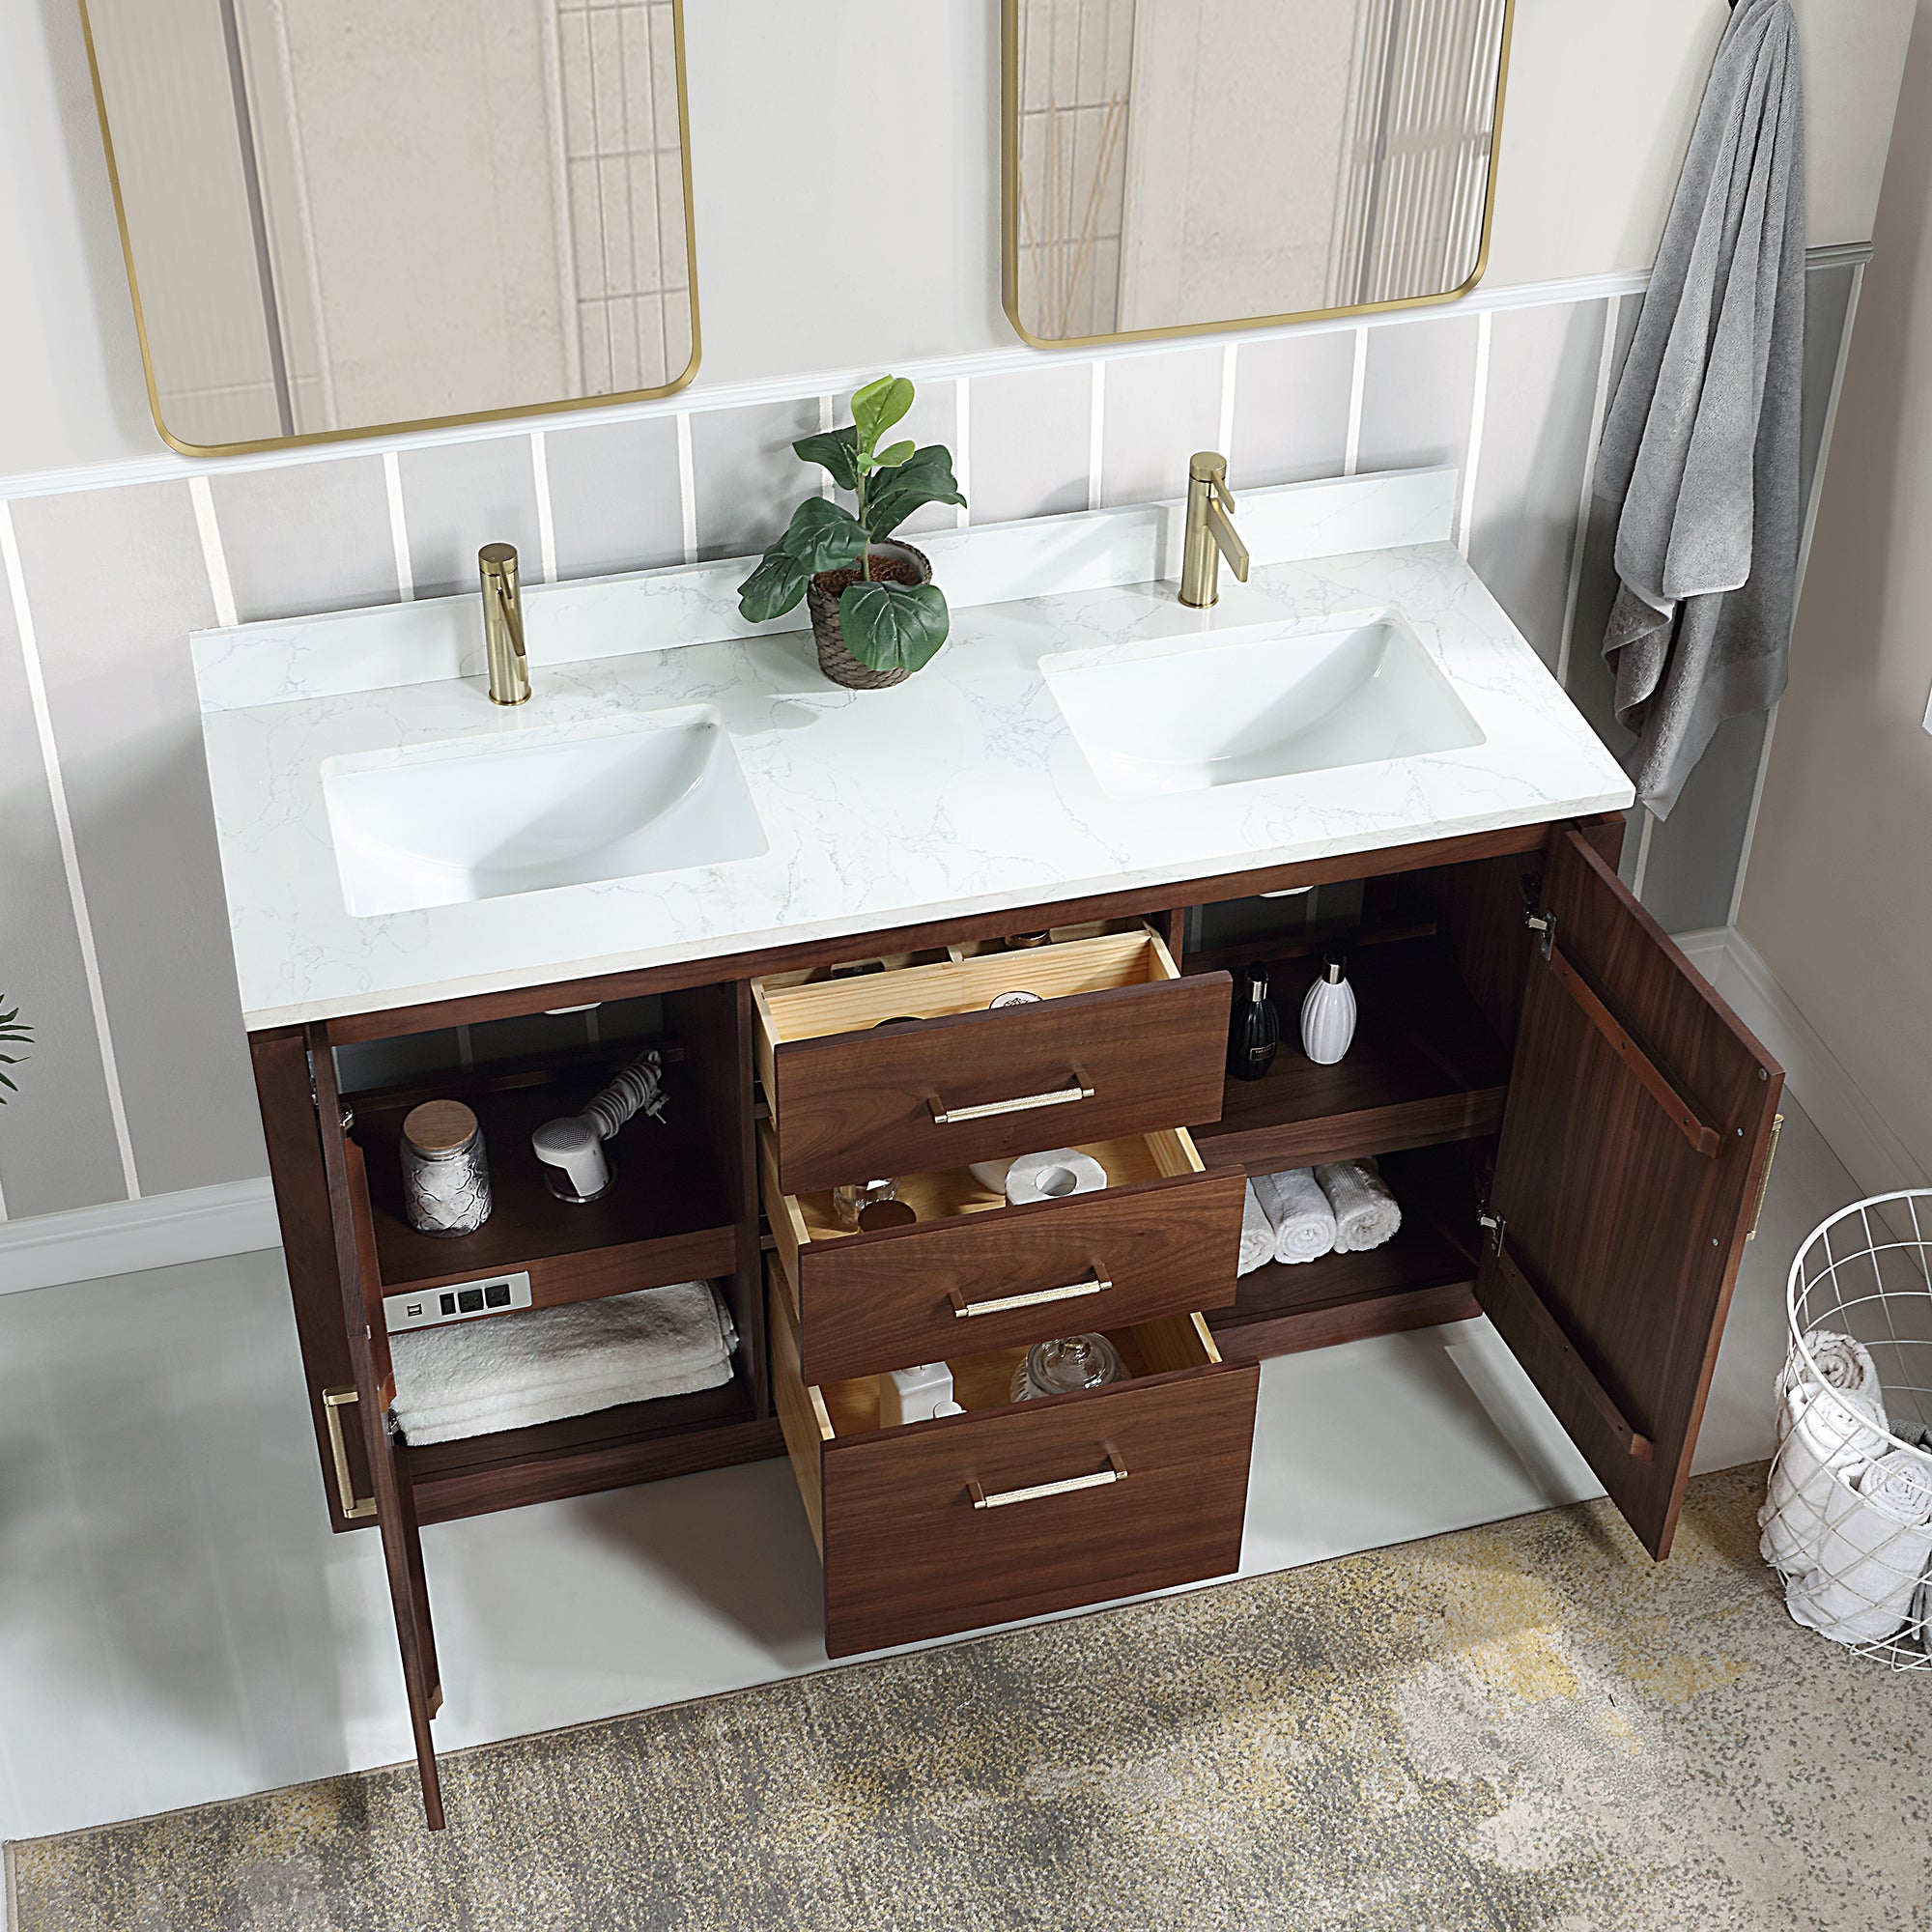 San 60M" Free-standing Double Bath Vanity in Natural Walnut with White Grain Composite Stone Top